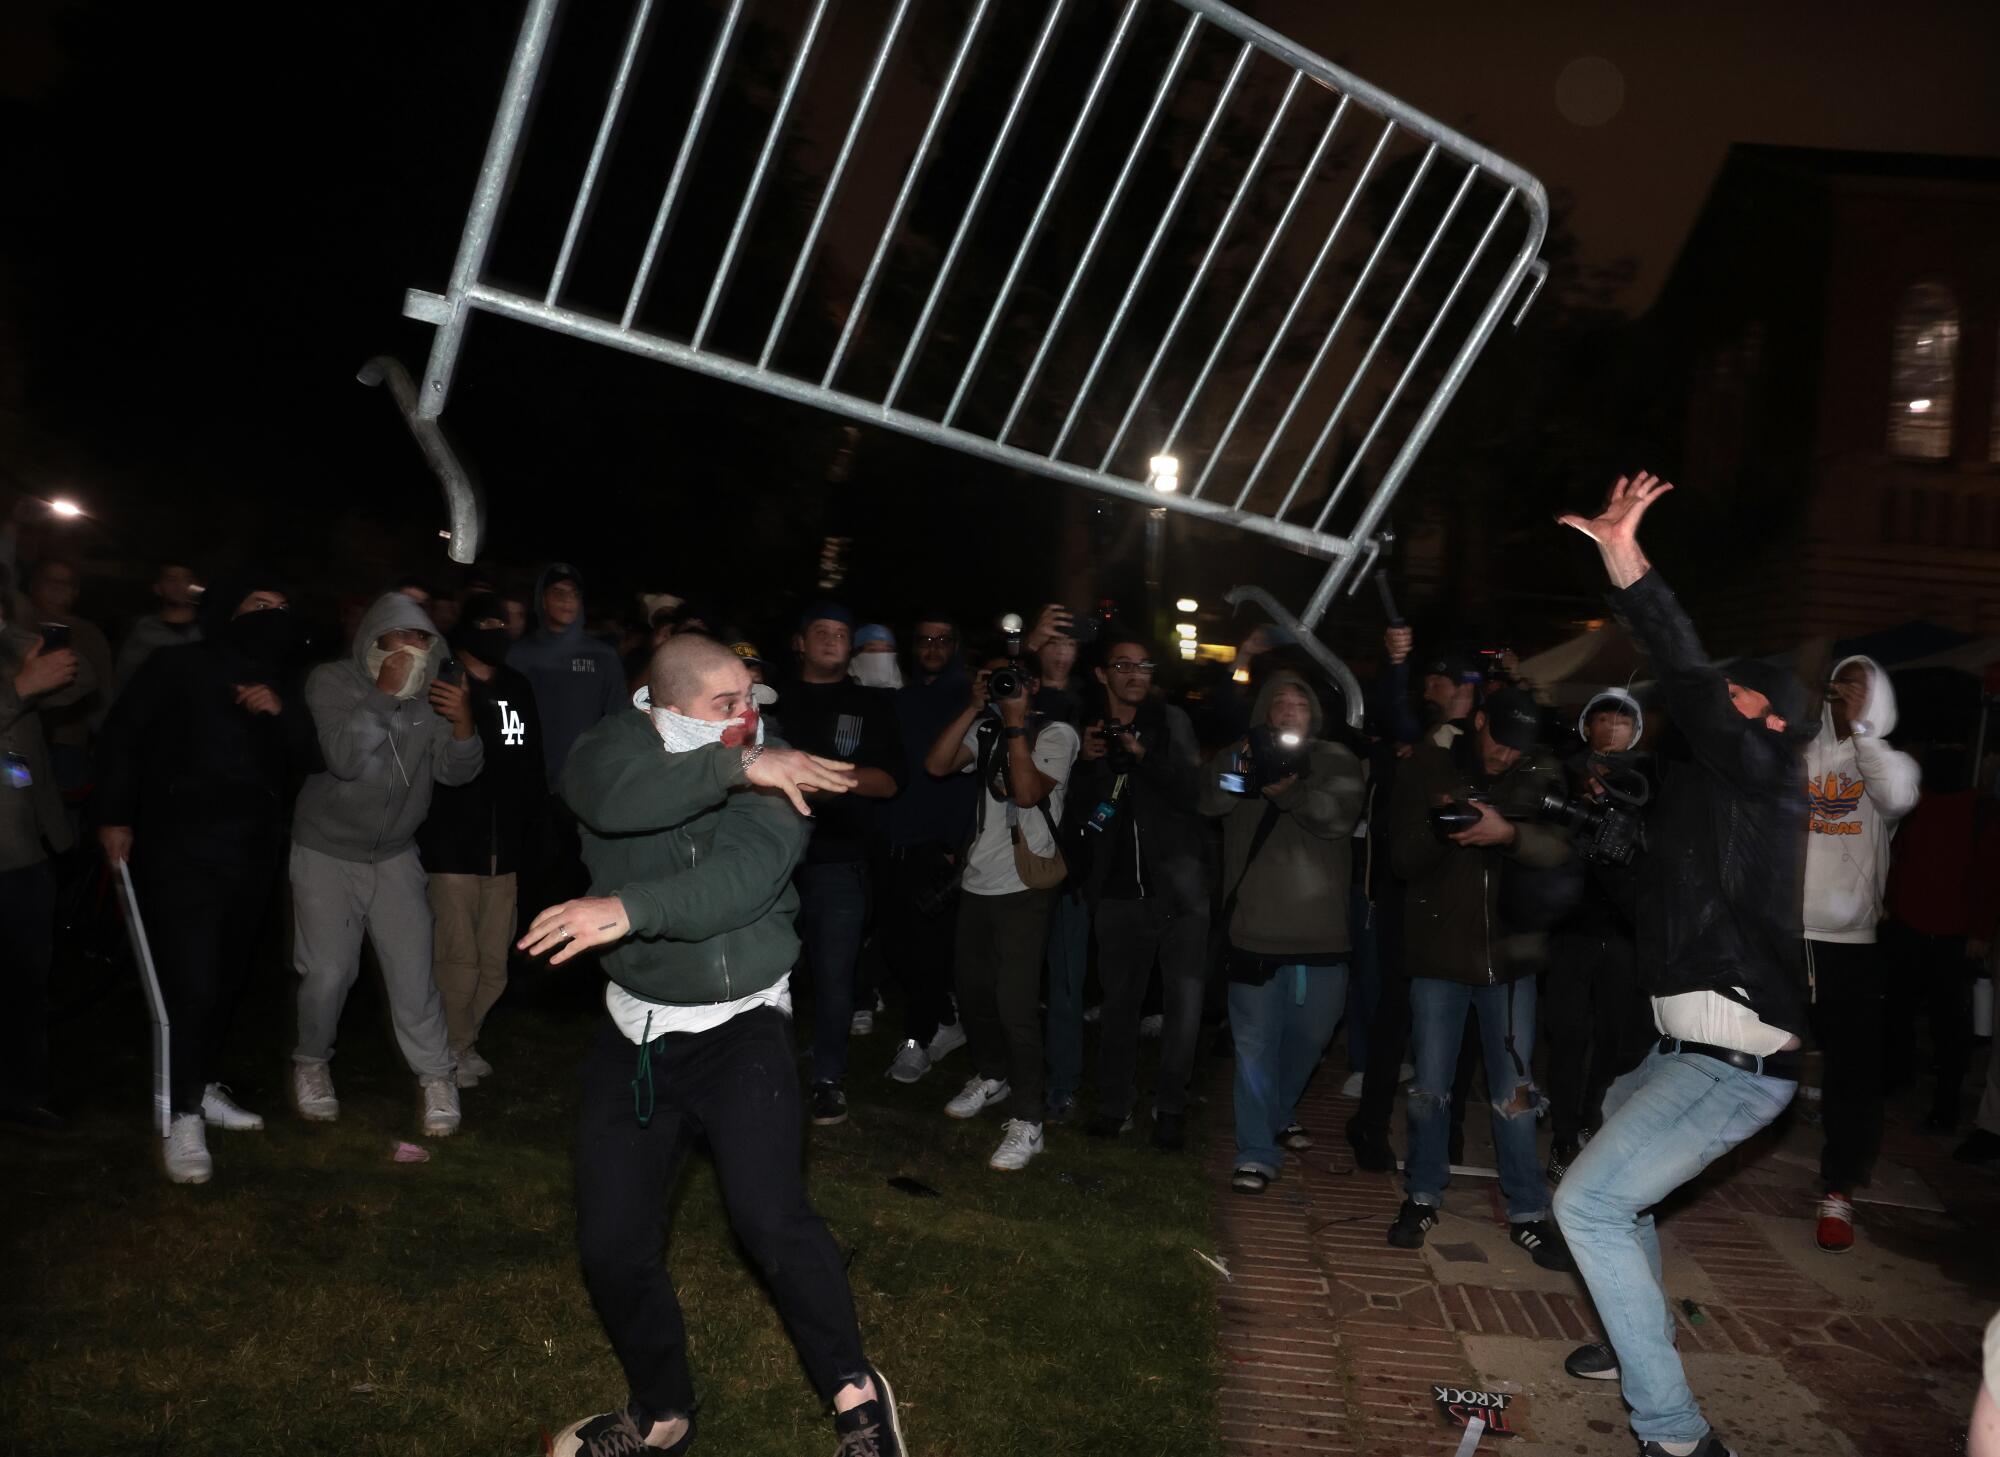 Pro-Palestinian protesters and pro-Israeli supporters clash at an encampment at UCLA.